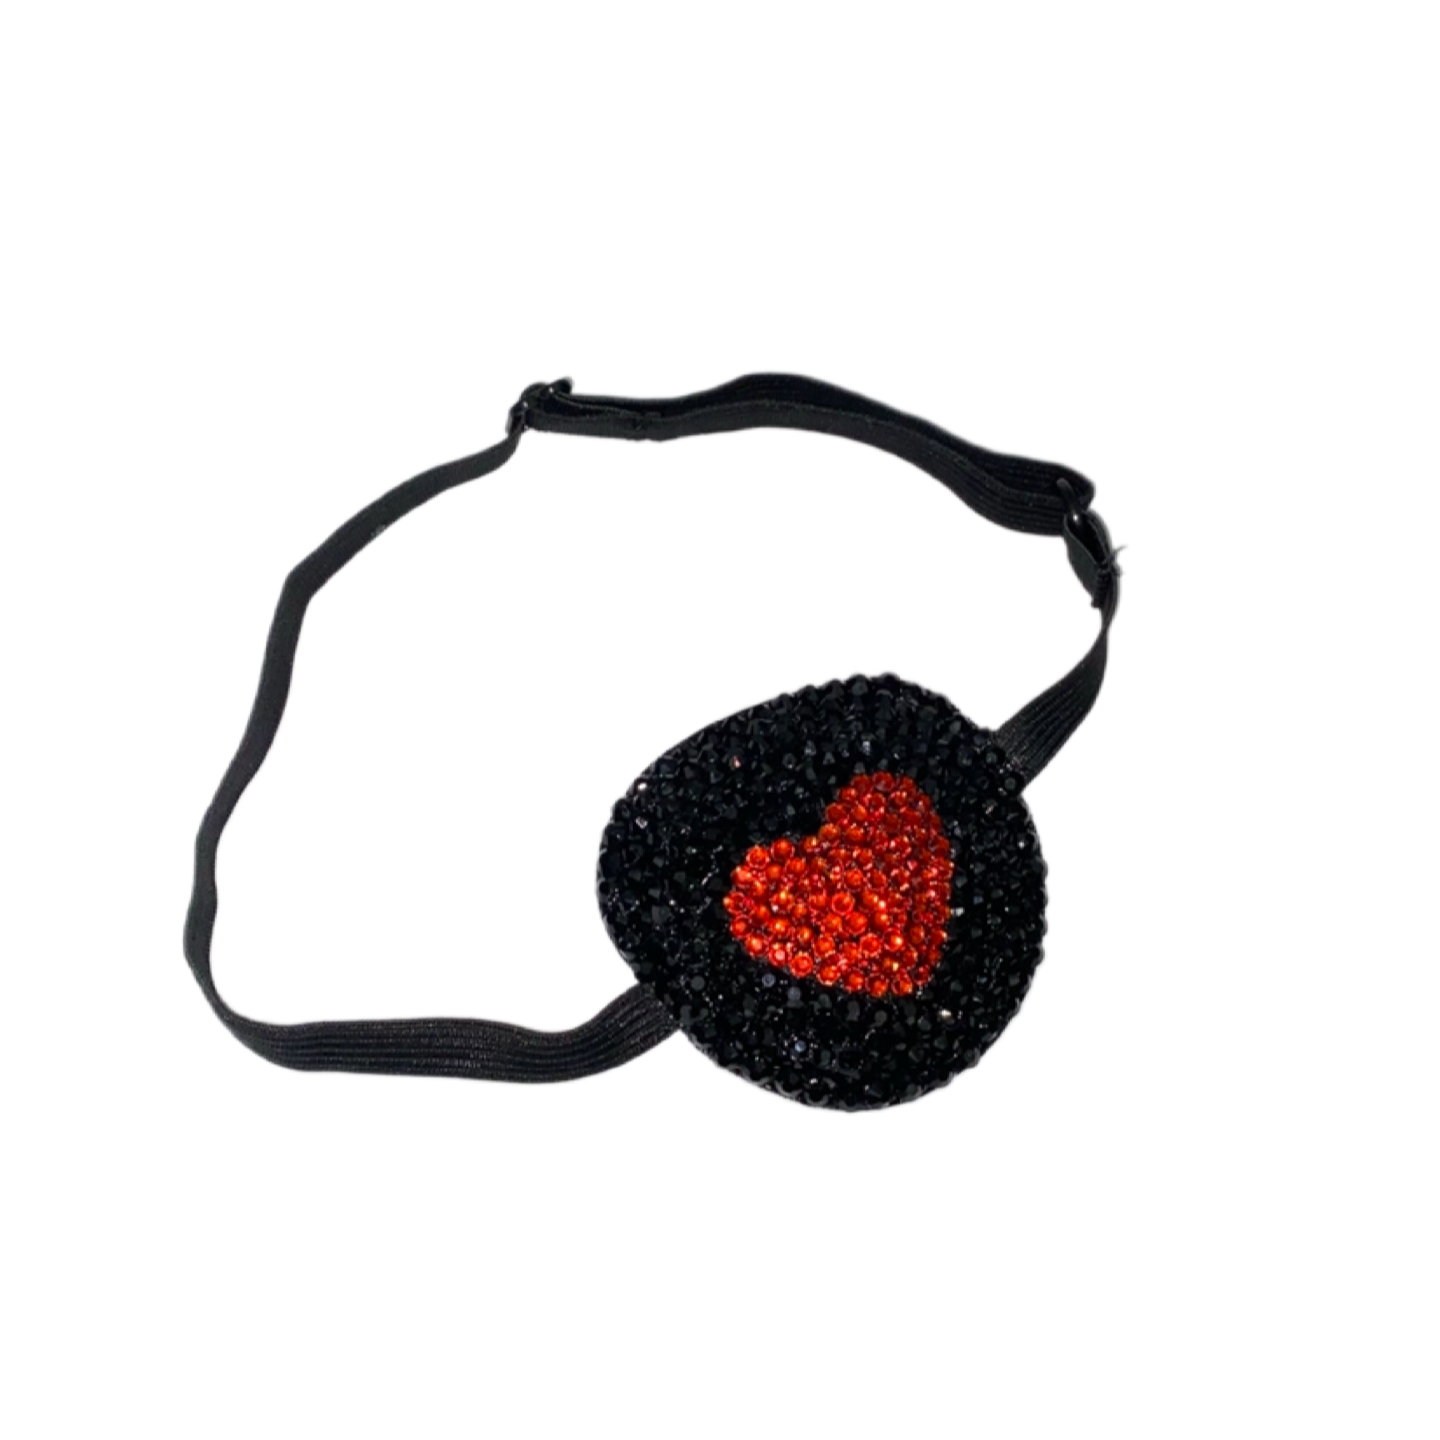 Black Padded Medical Patch In Black Crystal With Red Heart Eye Patch